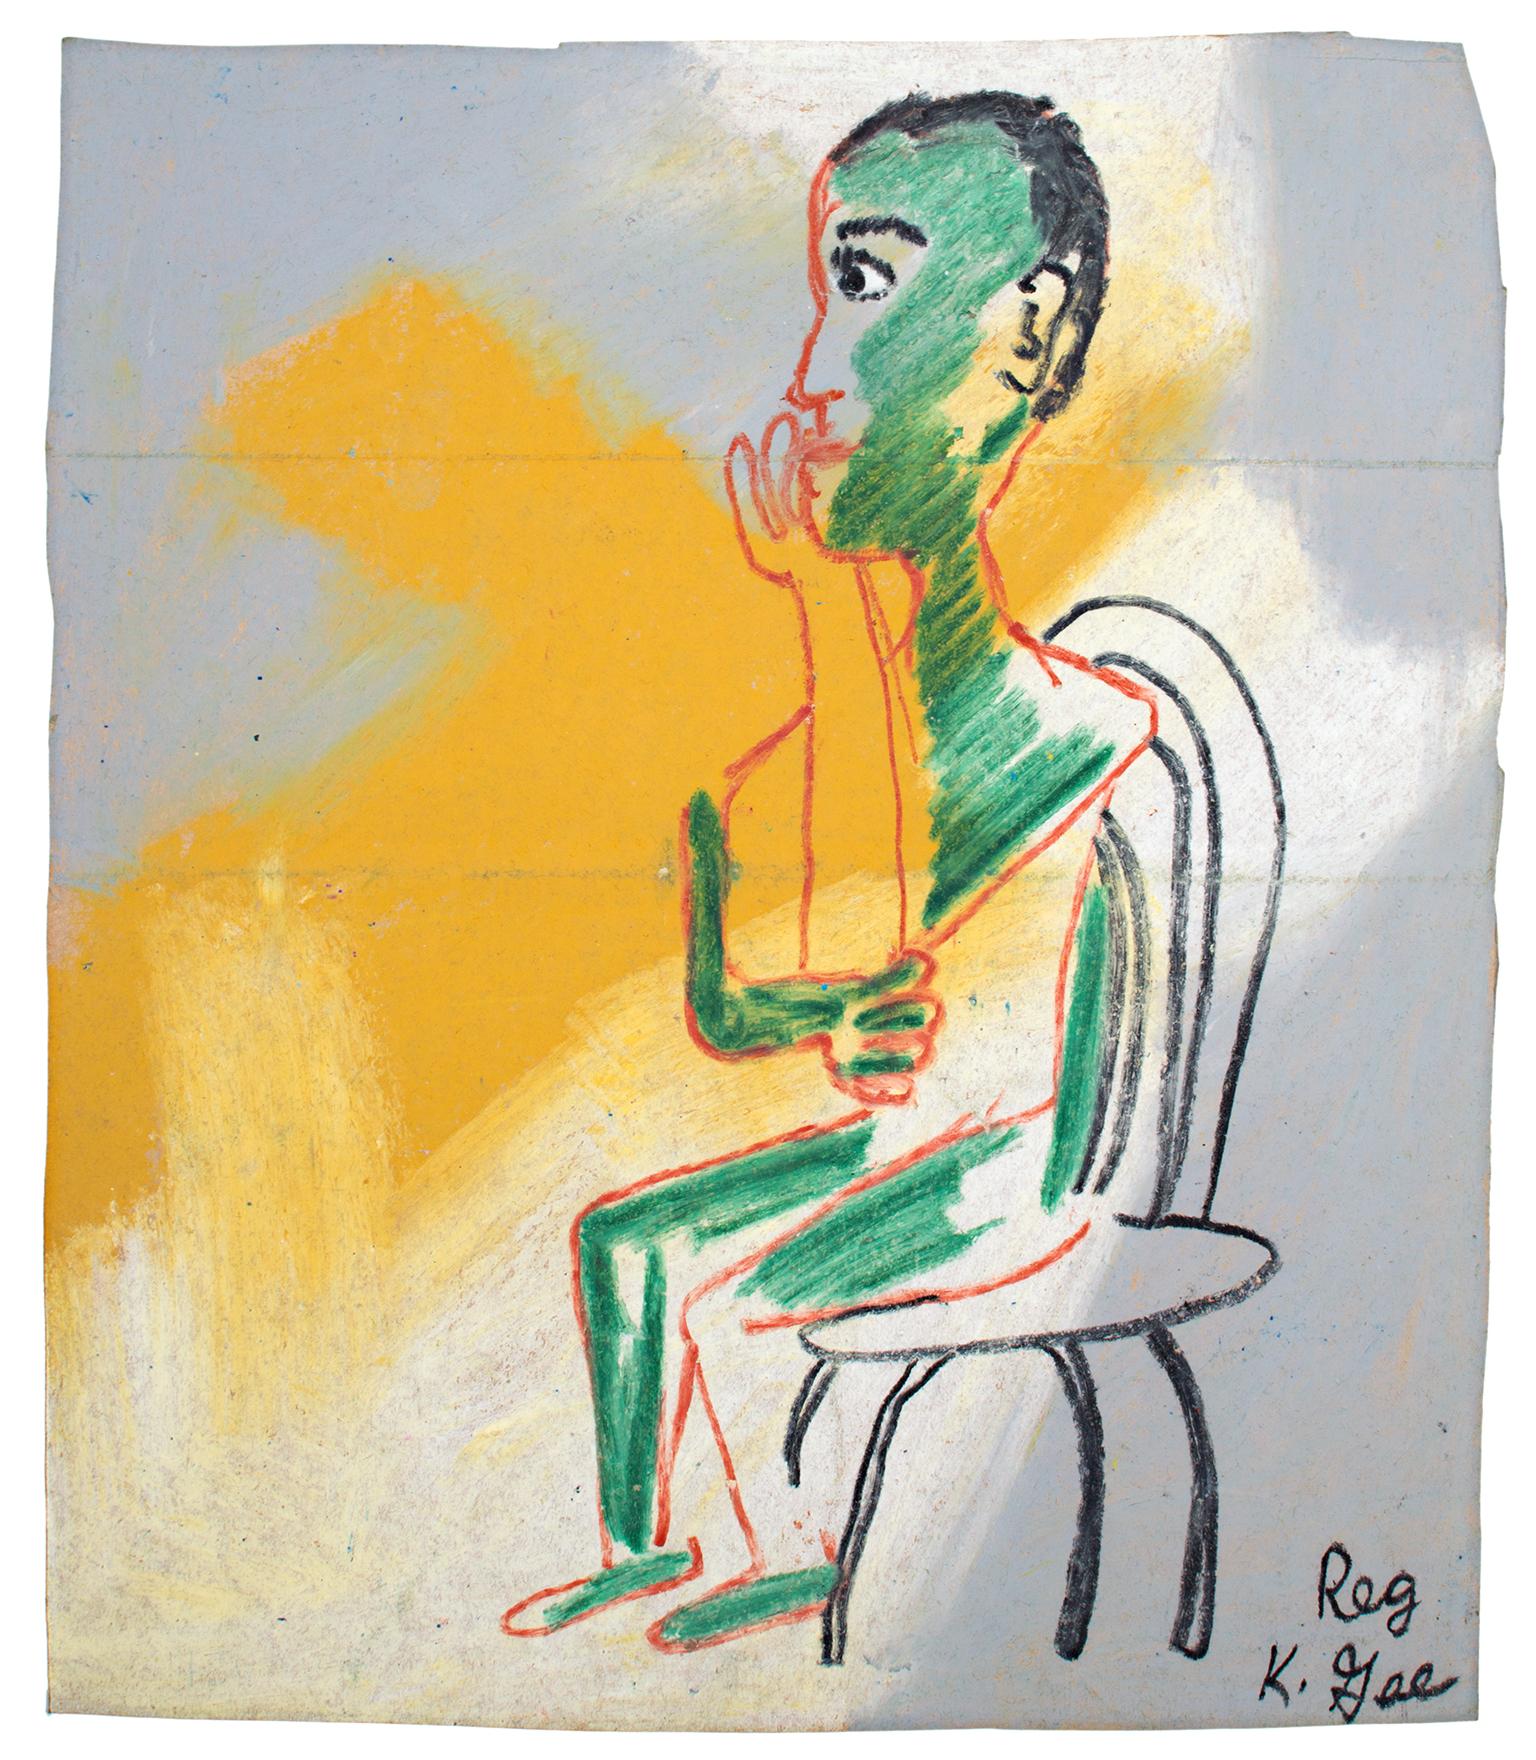 "The Average Guy" is an original oil pastel drawing on a grocery bag by Reginald K. Gee. The artist signed the piece lower right. This piece features a seated man with his head resting in his hand. He is outlined in red and has green. The background